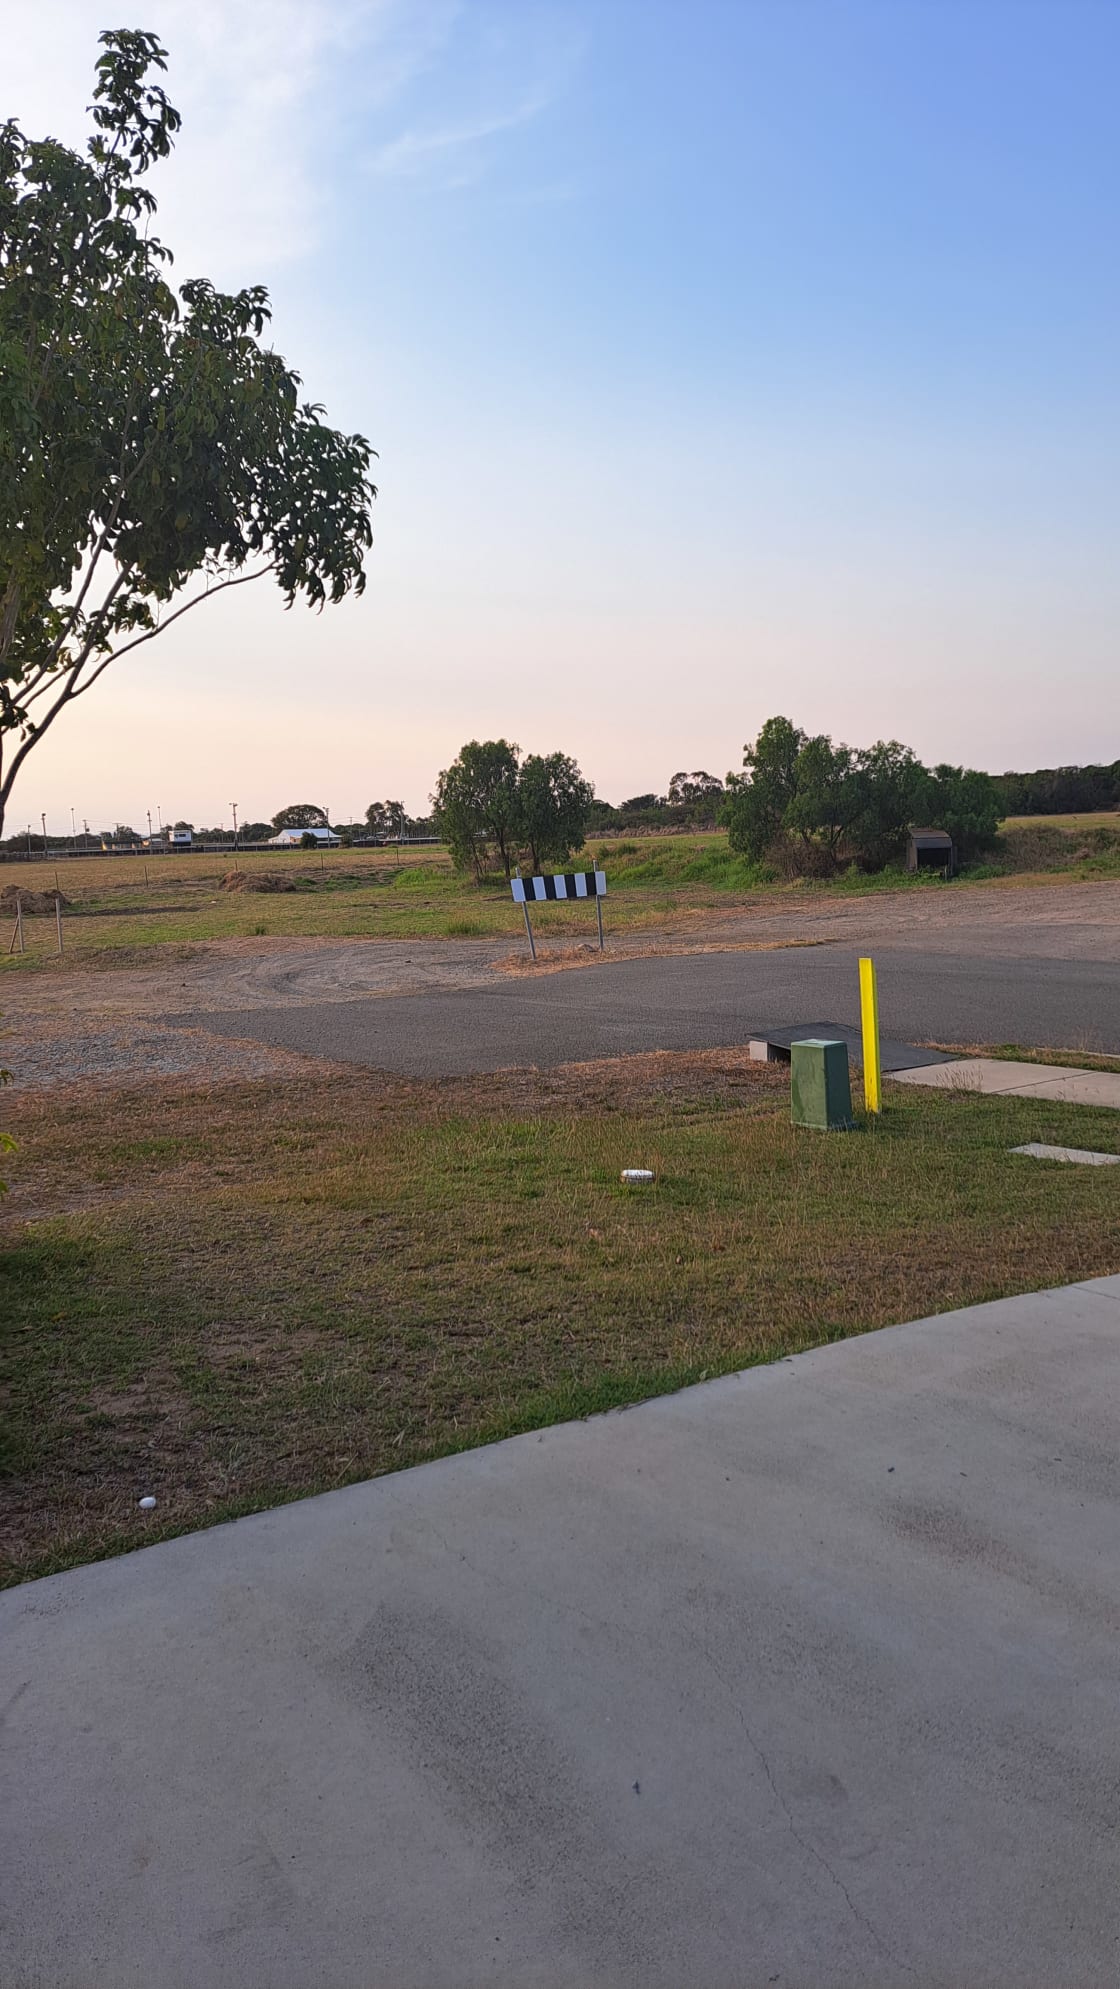 View from end of the street, access to the camping area